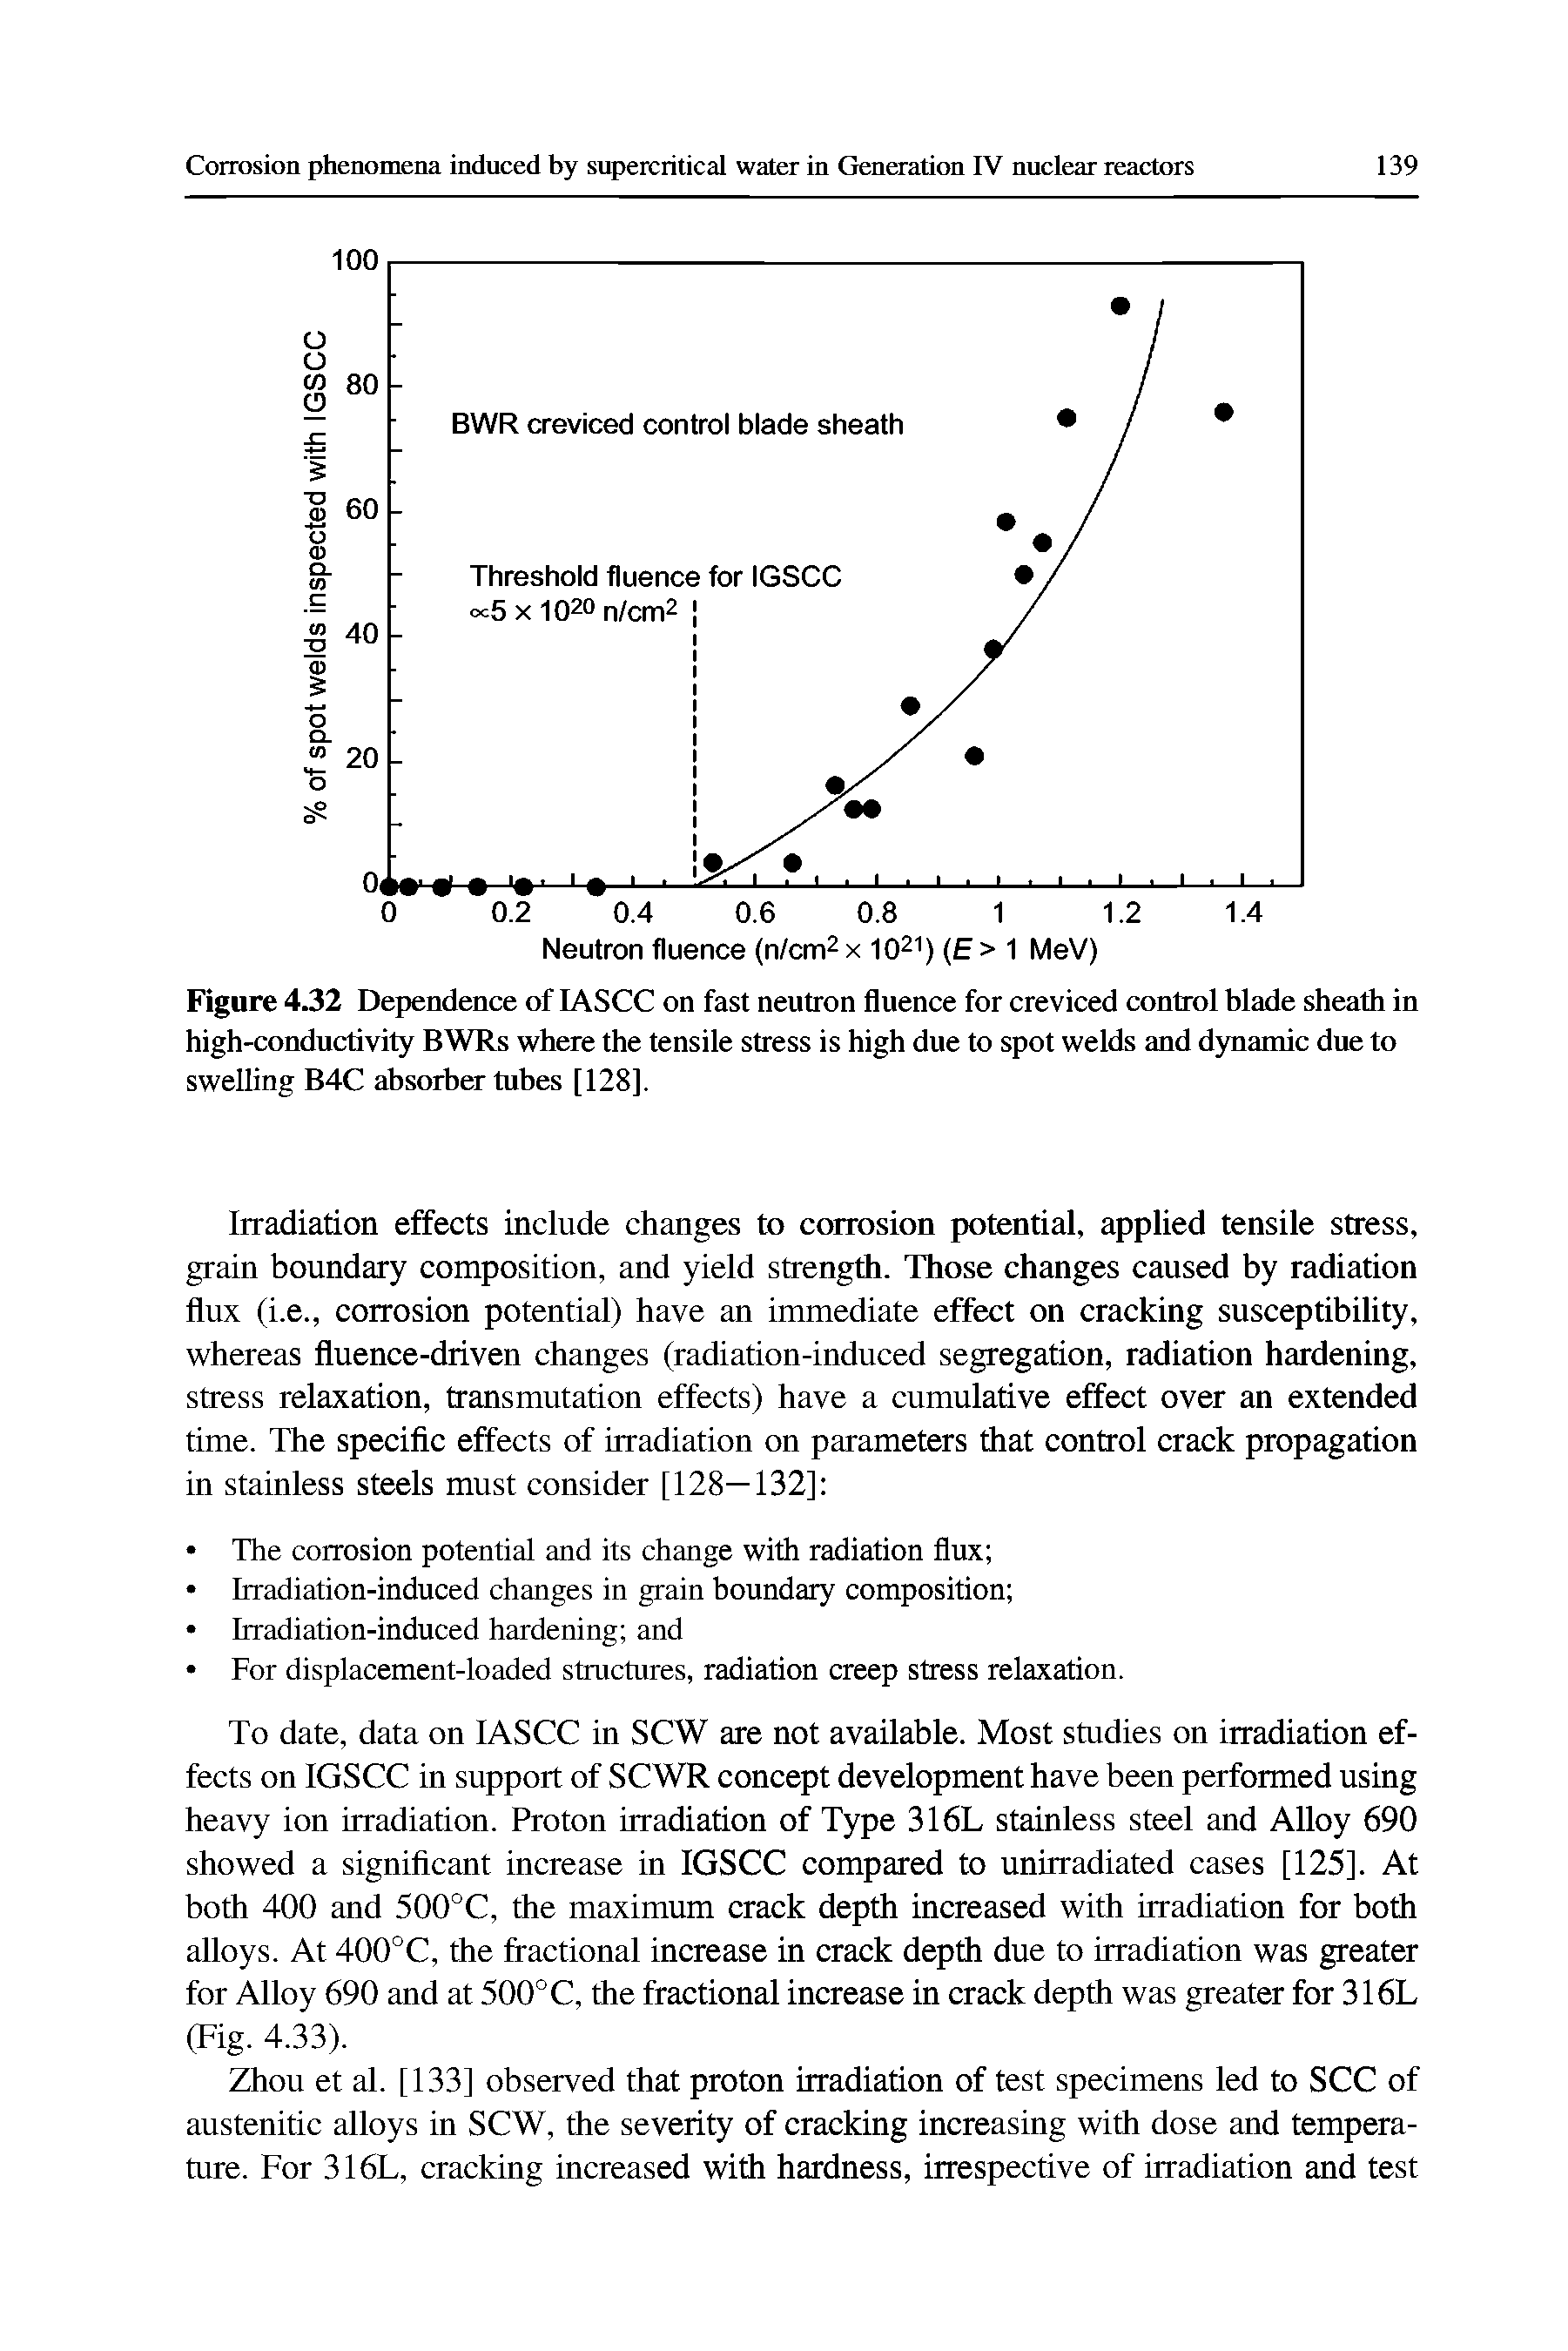 Figure 4.32 Dependence of lASCC on fast neutron fluence for creviced control blade sheath in high-conductivity BWRs where the tensile stress is high due to spot welds and dynamic due to swelling B4C absorber tubes [128].